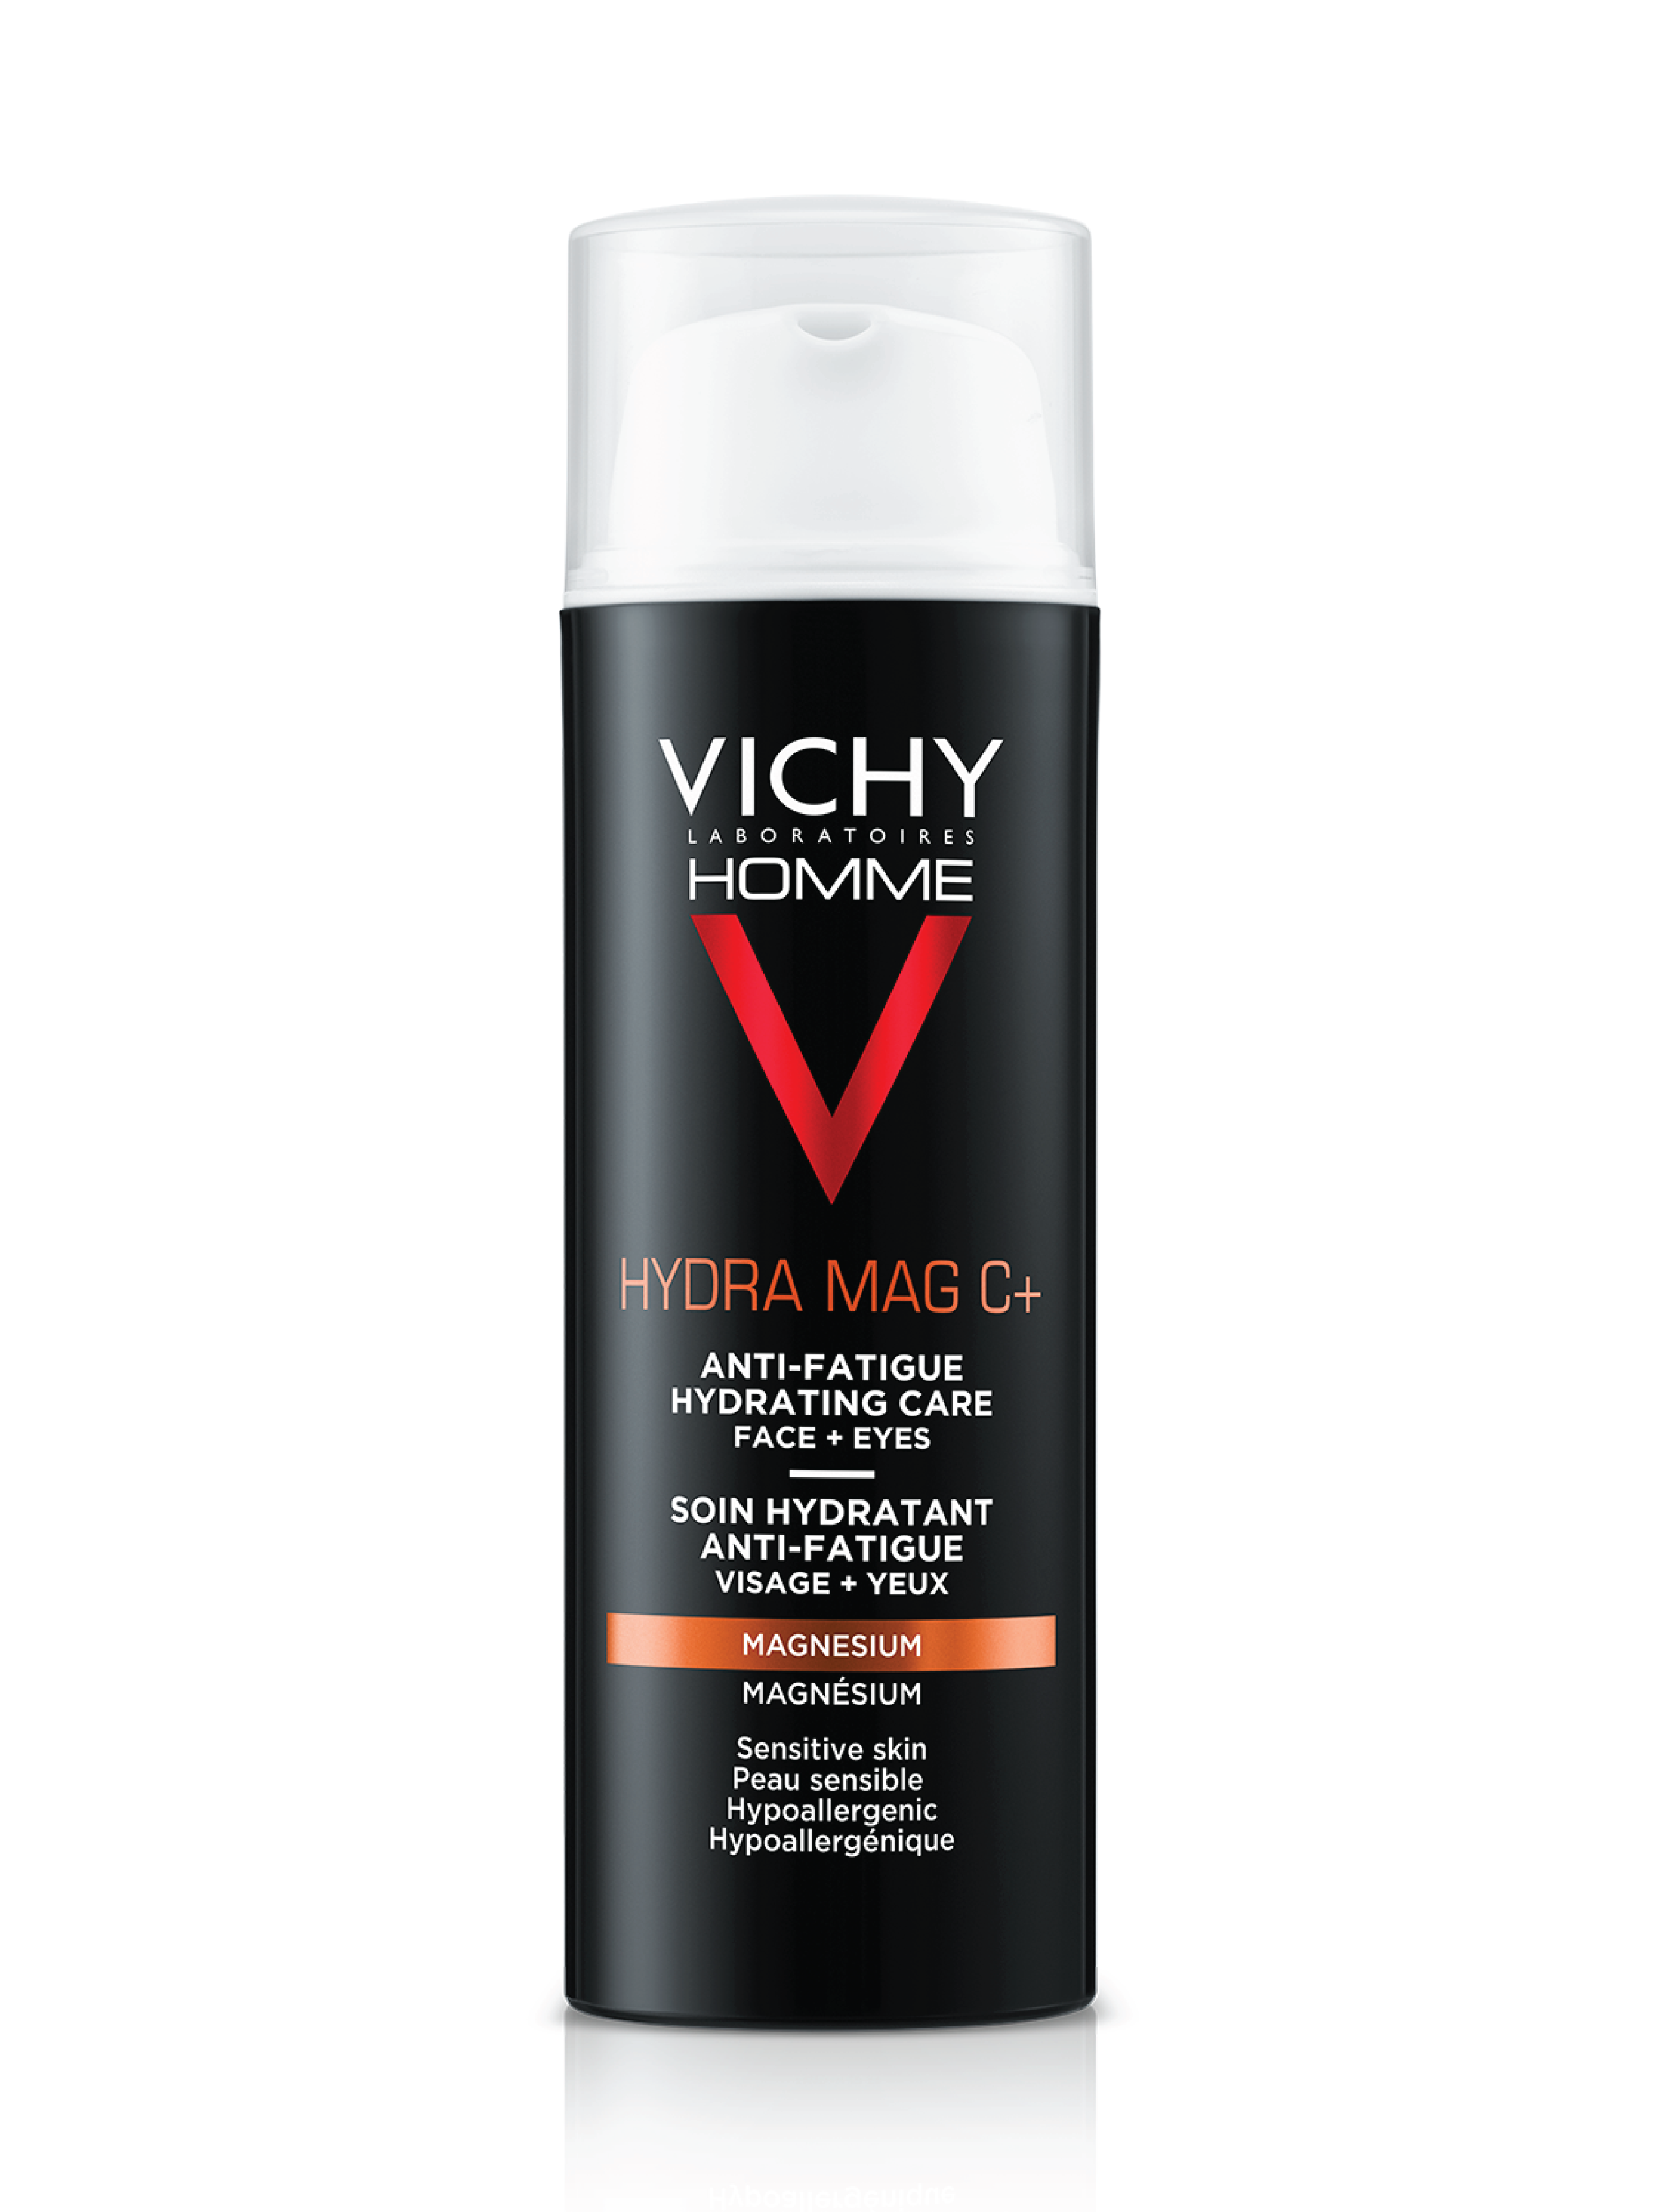 Vichy Homme Hydra Mag C+ Anti-Fatigue Hydrating Care Face + Eyes, 50 ml